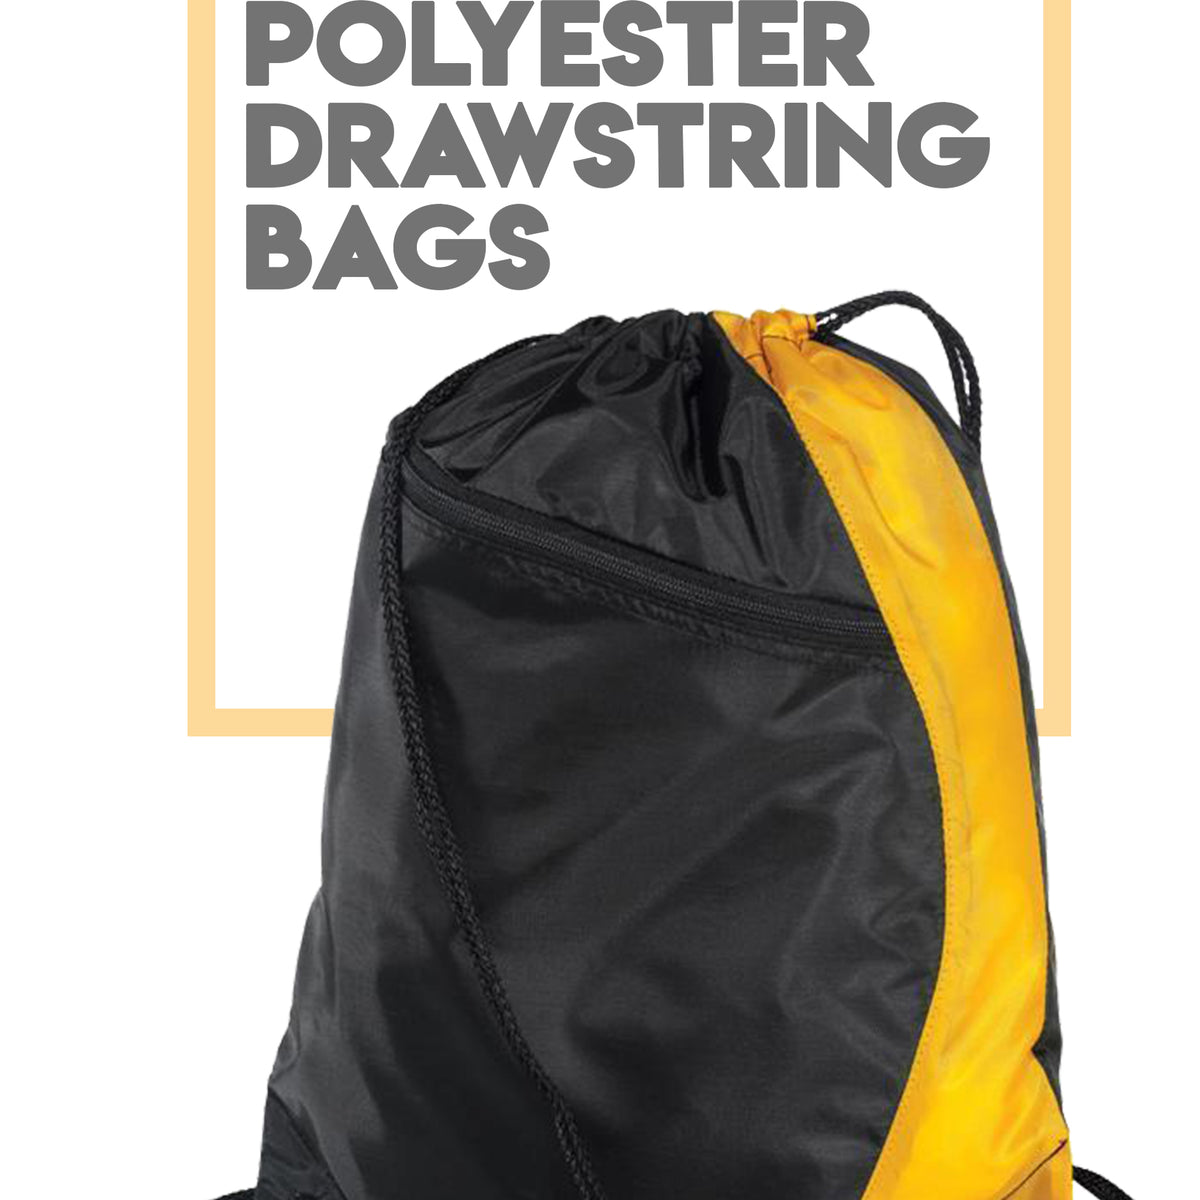 Polyester Drawstring Bags, Polyester Backpacks, Clear Drawstring Bags